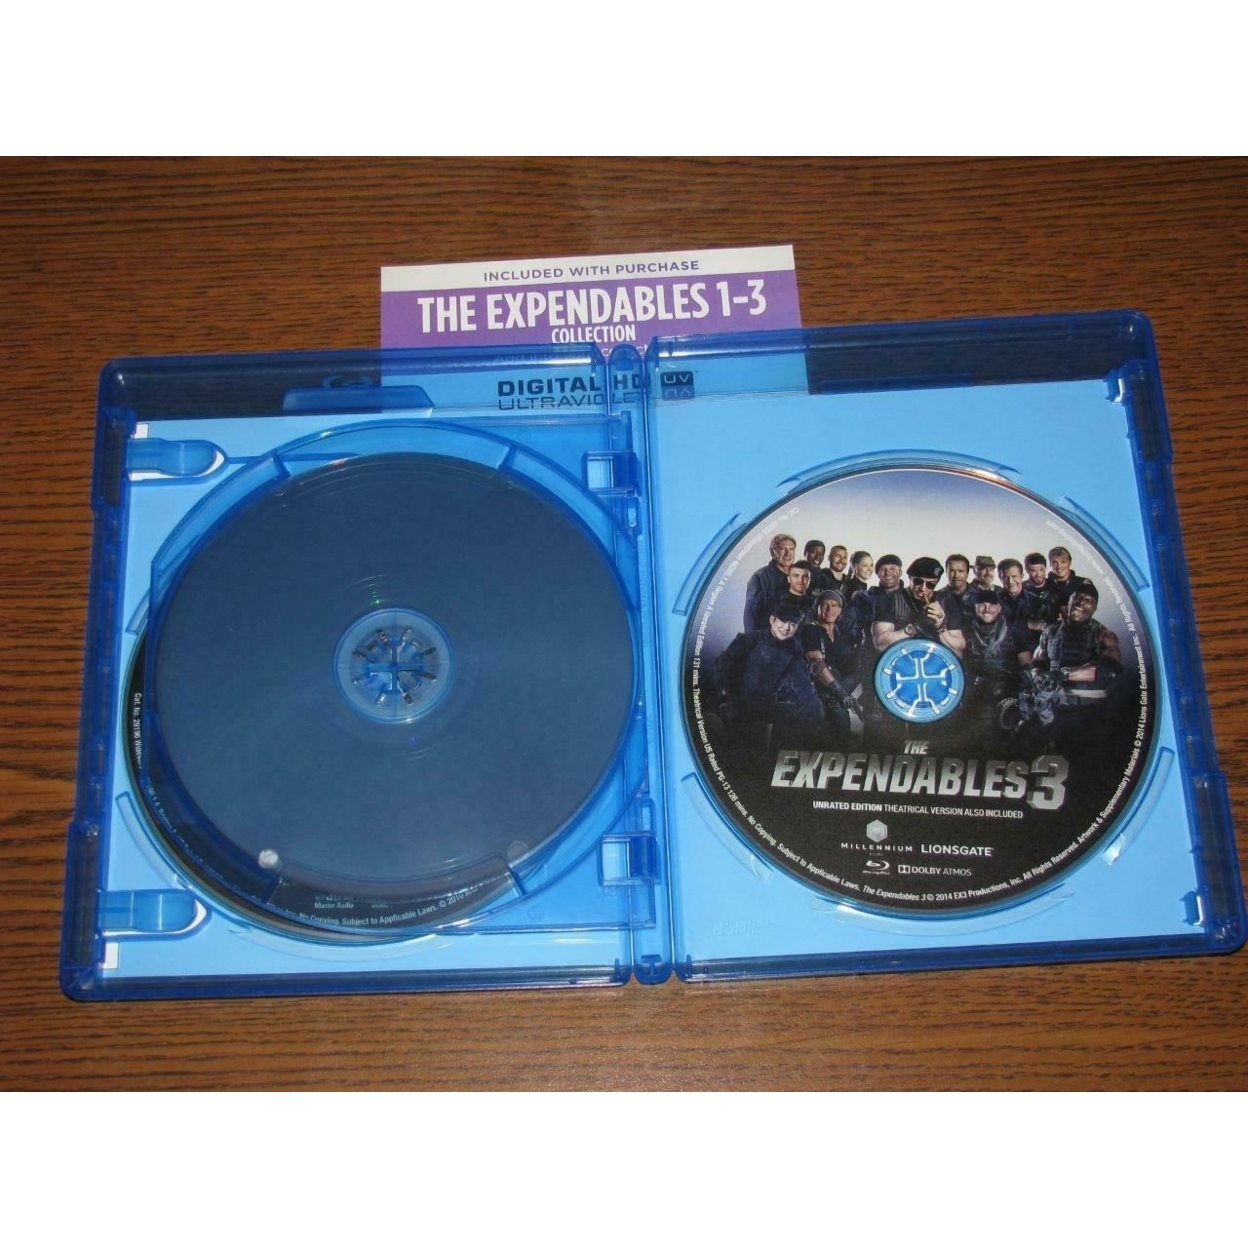 The Expendables 1, 2 & 3: 3-Film Collection (Blu-ray), Lions Gate, Action & Adventure - image 3 of 4